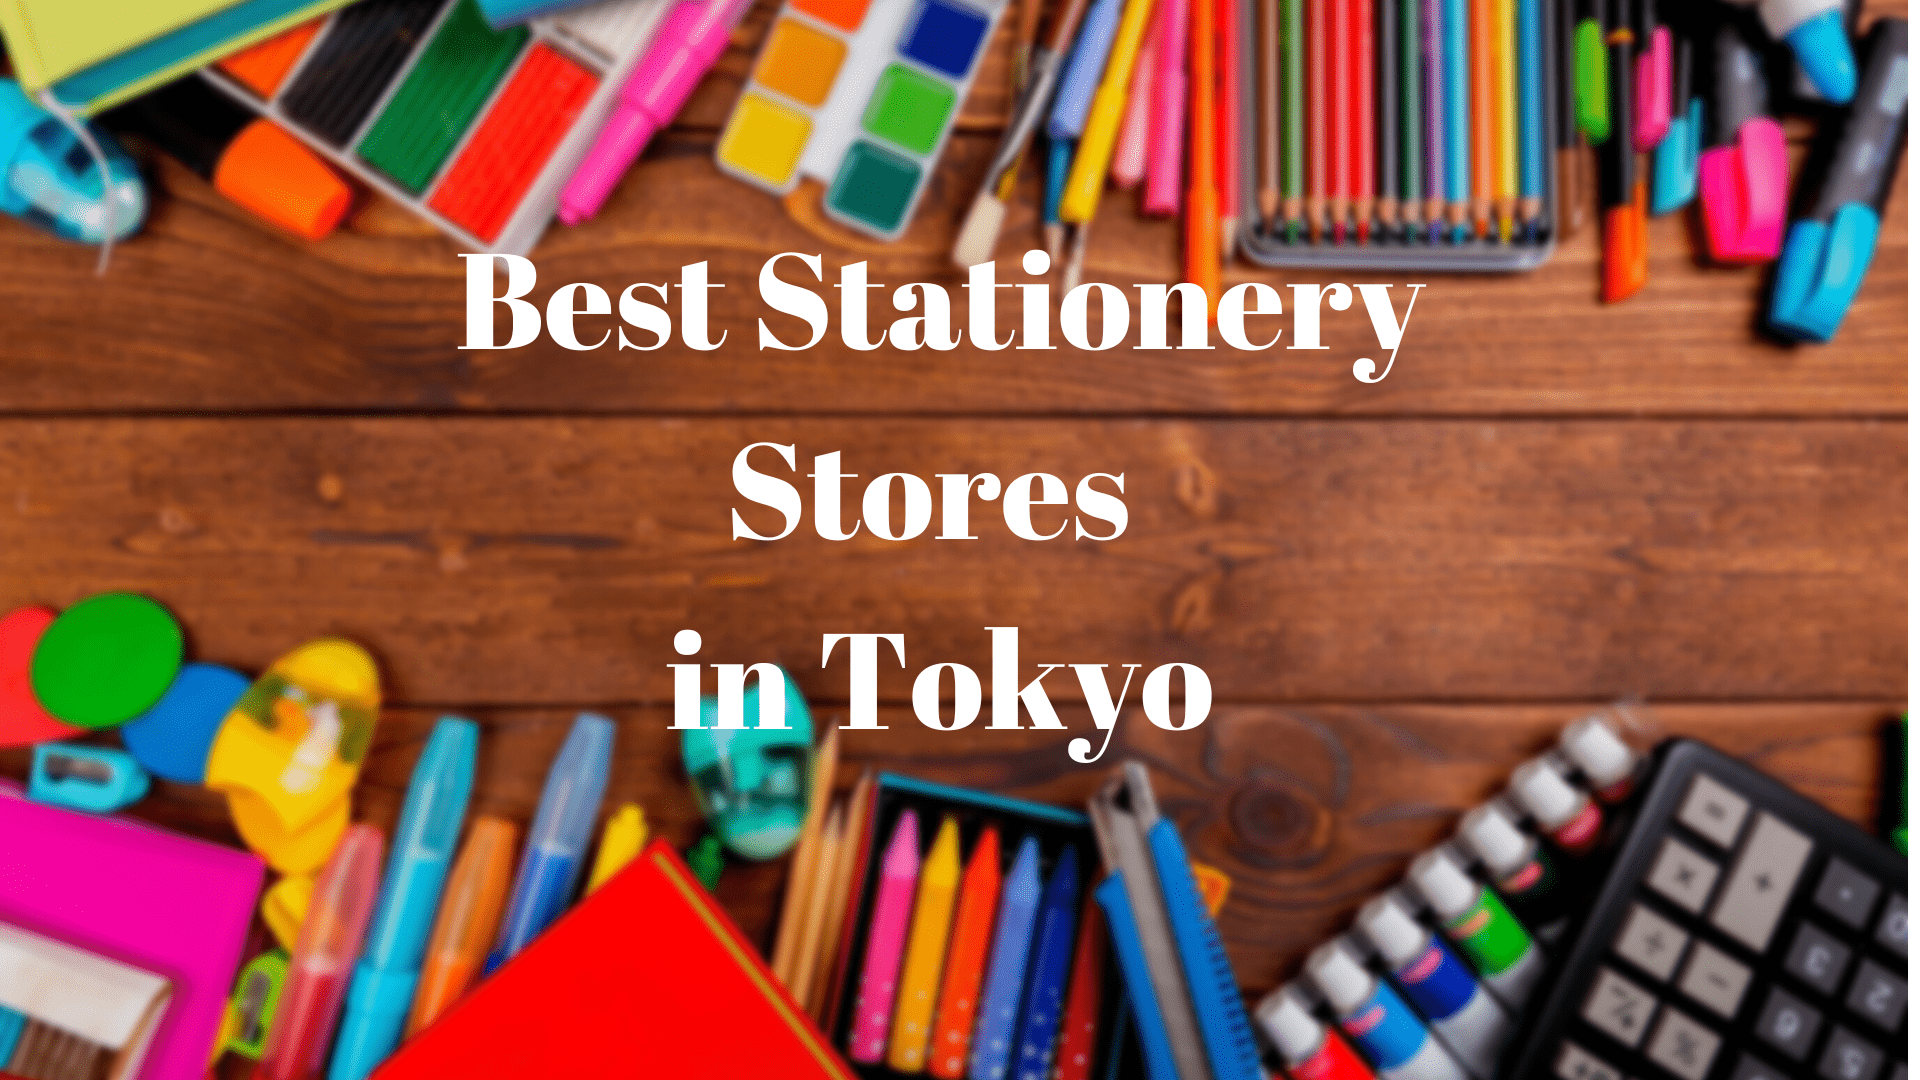 GUIDE TO LOFT - BEST JAPANESE STATIONERY STORE IN TOKYO  Japanese  stationery store, Stationery store, Japanese stationery